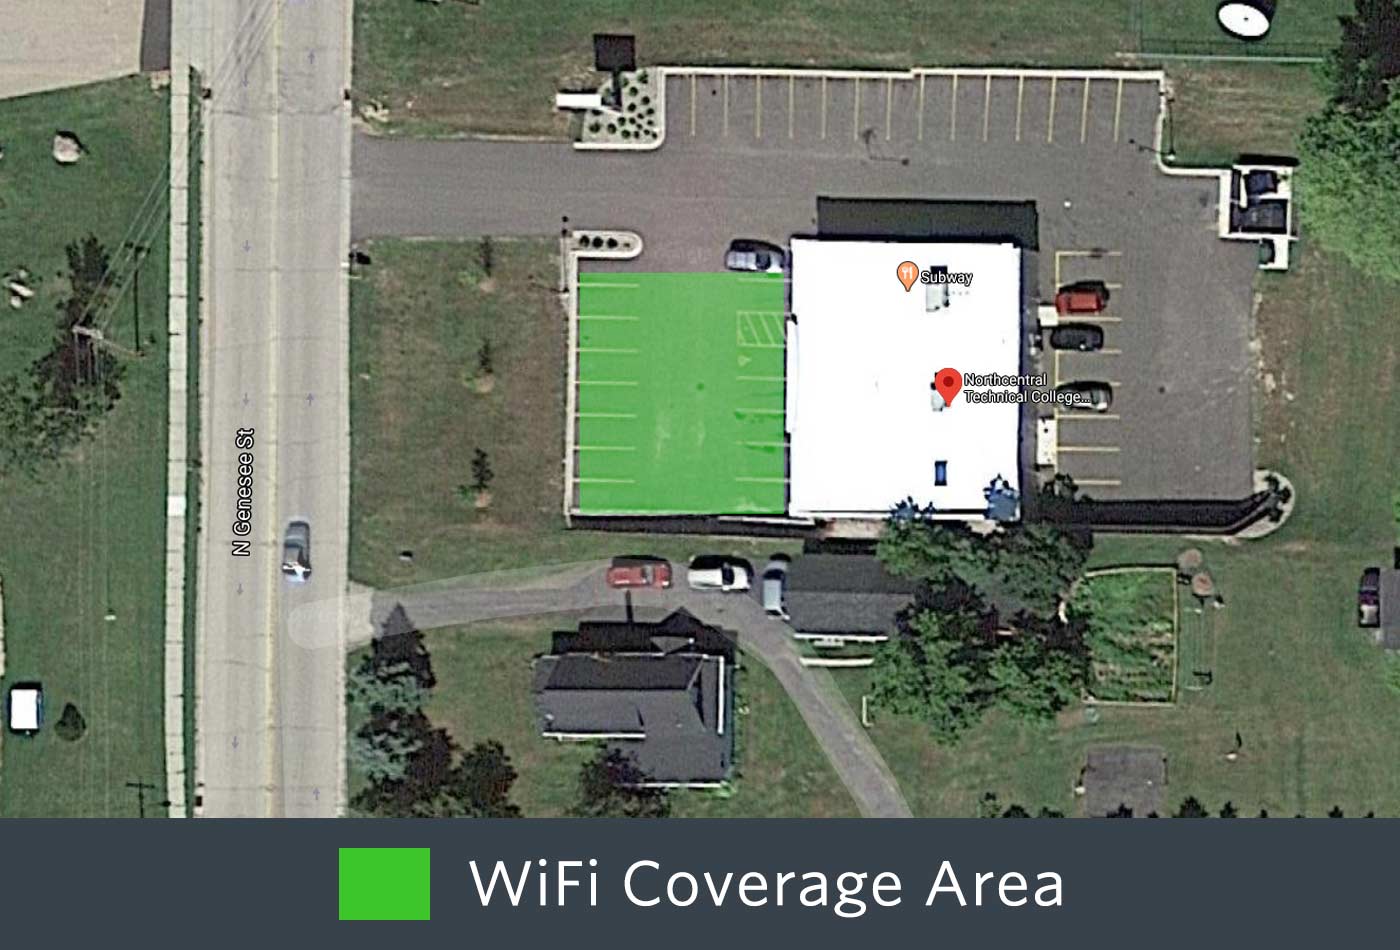 Outdoor WiFi coverage of the front of the Wittenberg Campus